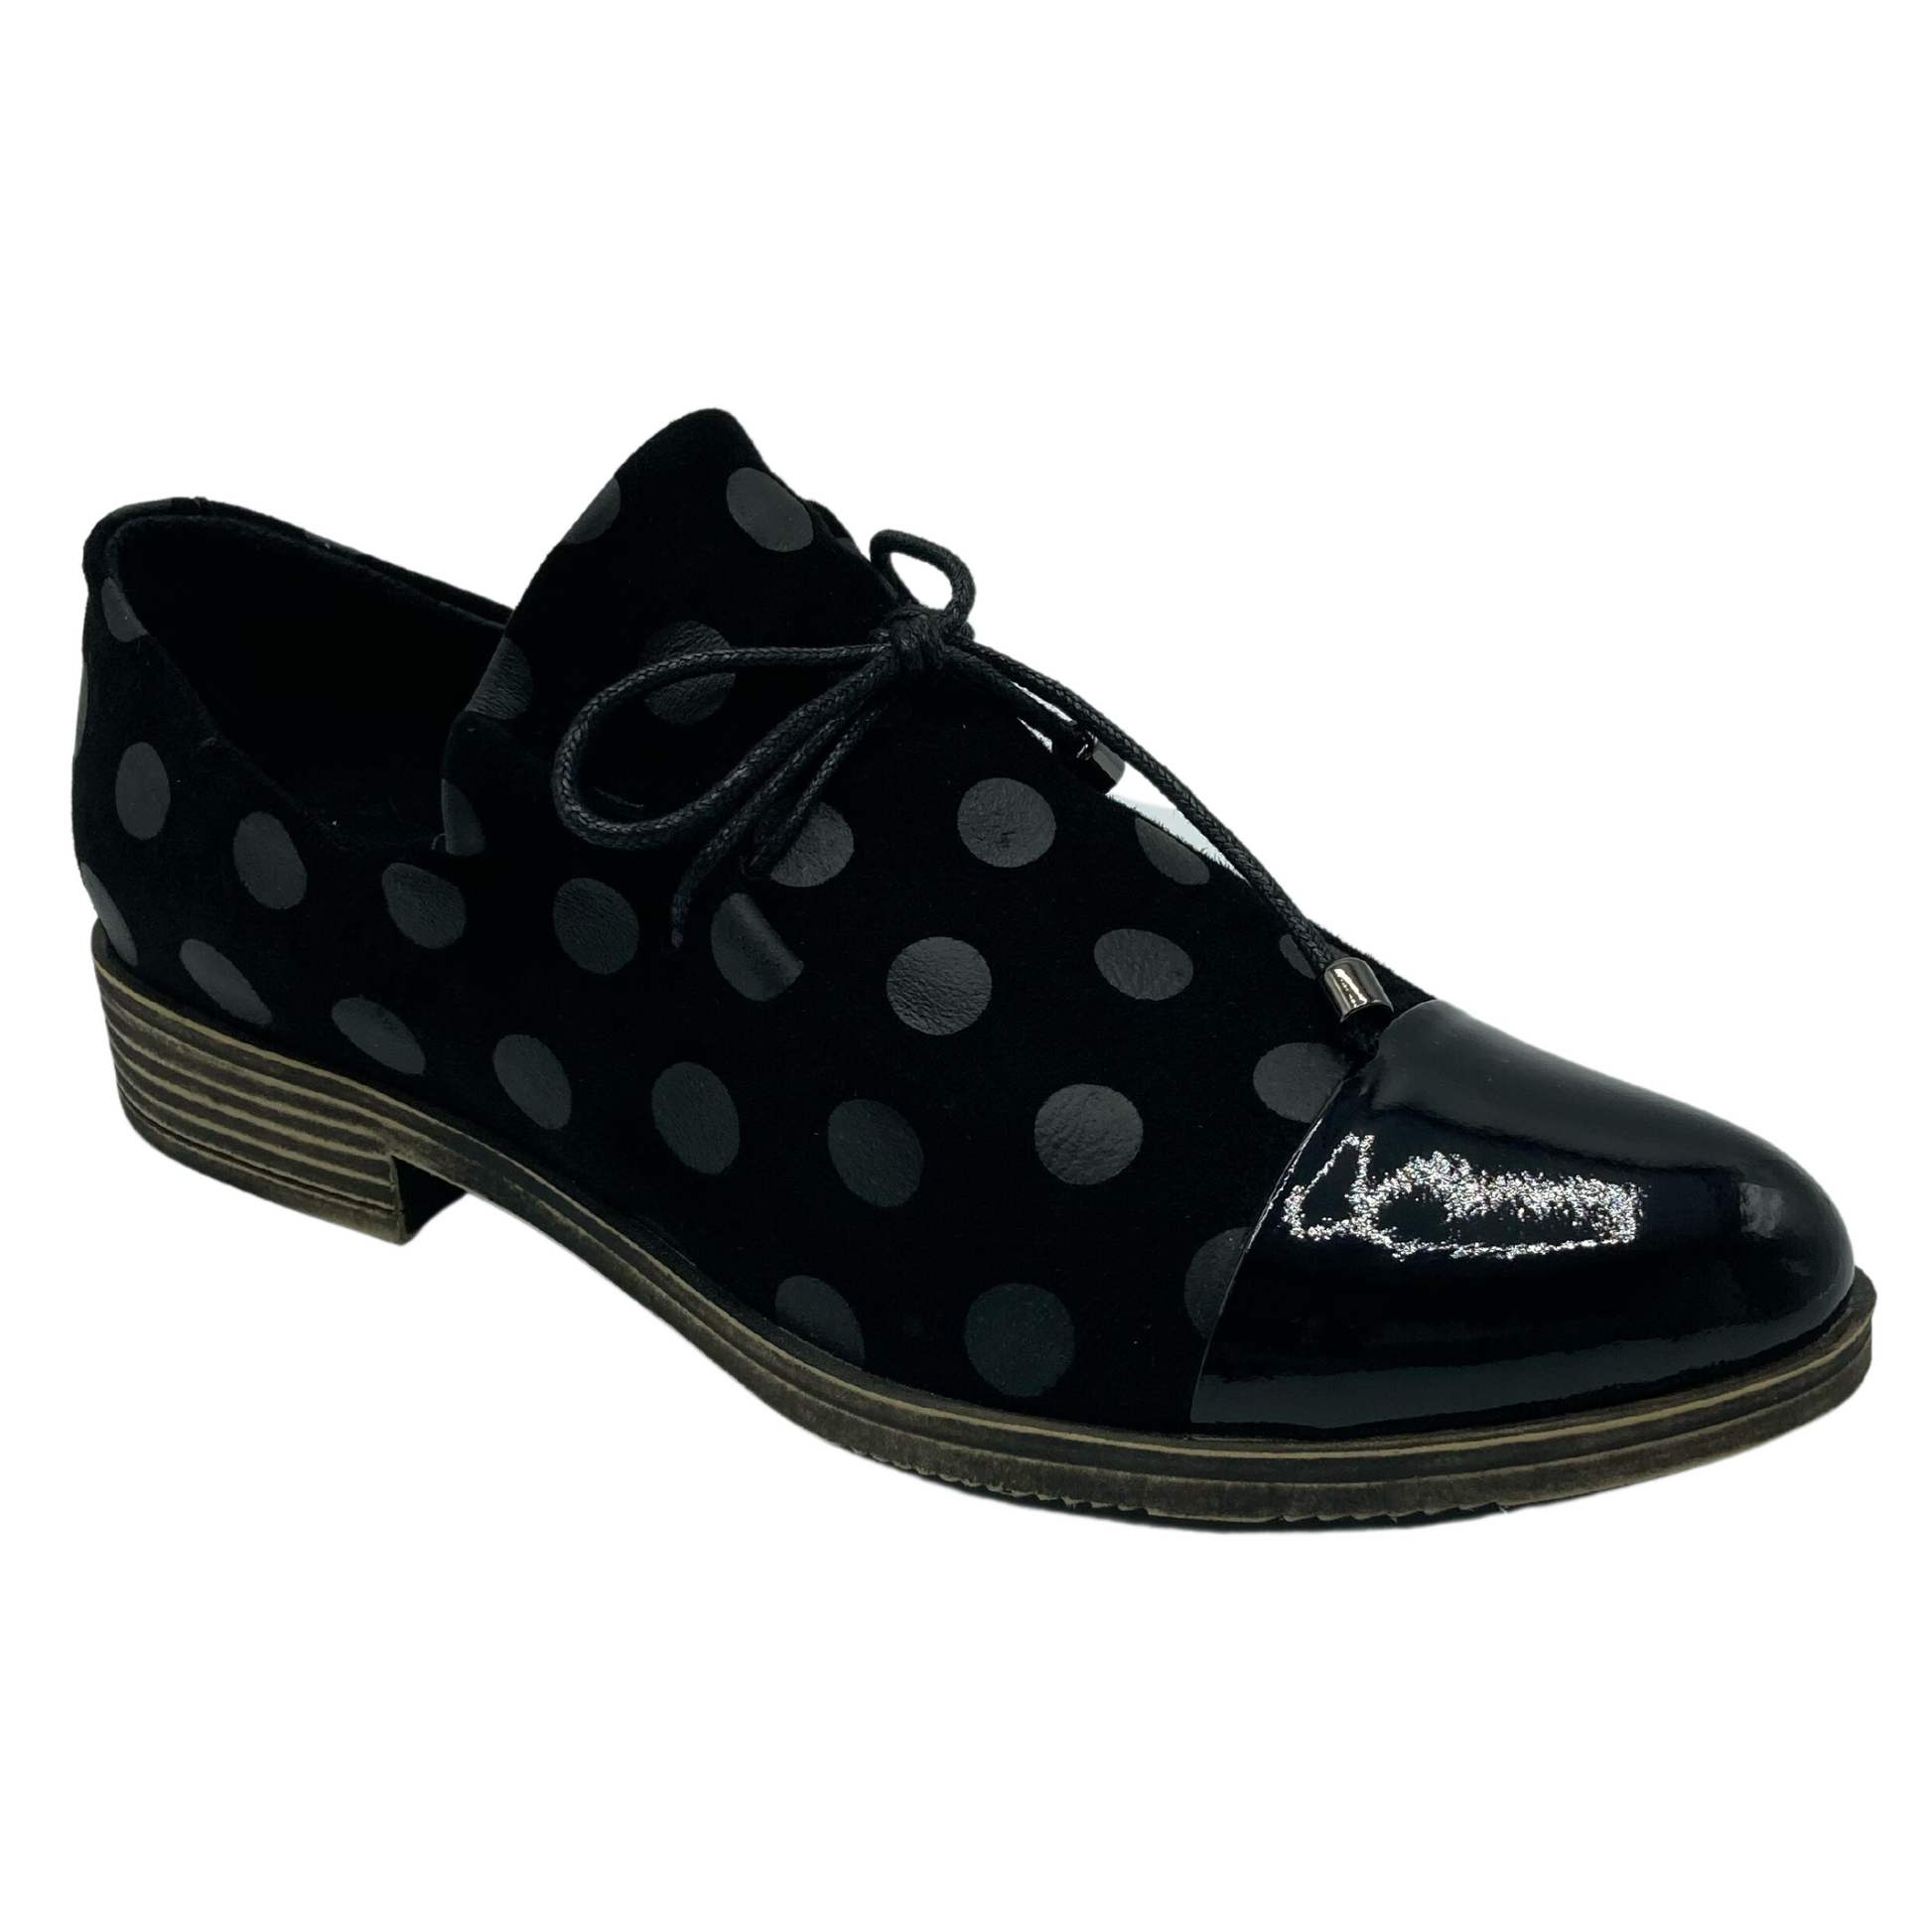 45 degree angled view of black leather shoe with black polka dots and shiny black toe cap.